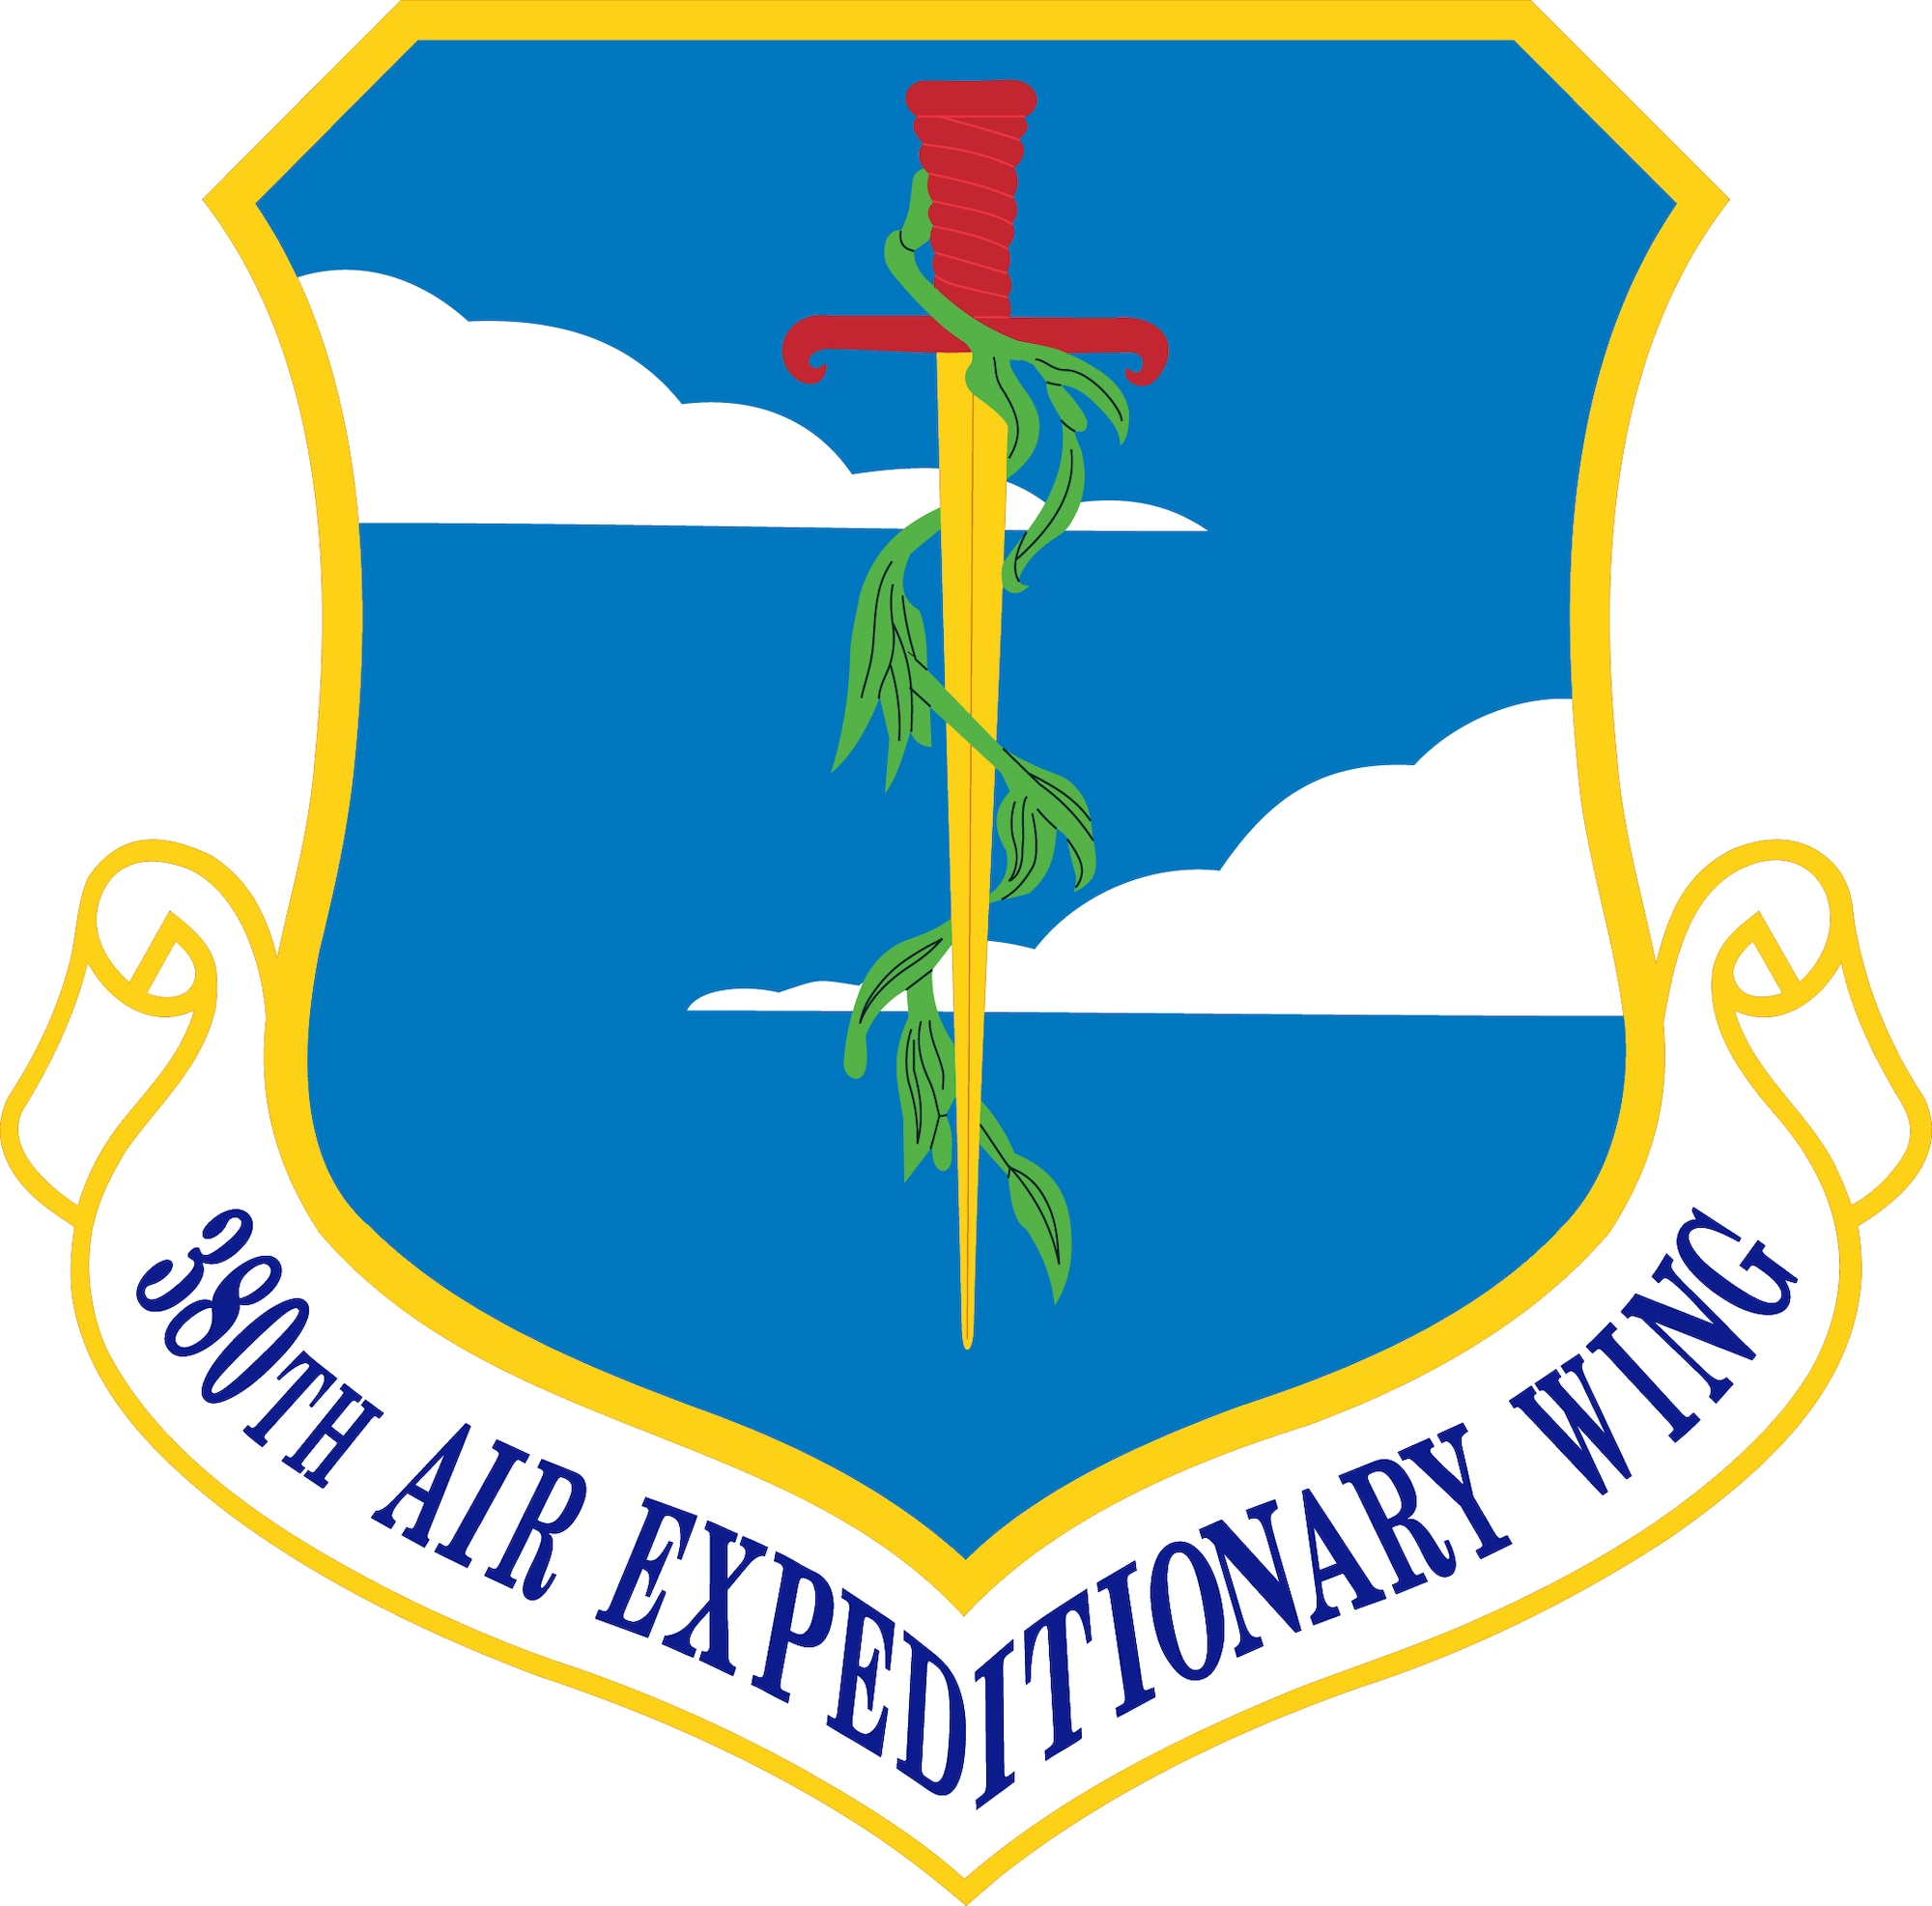 380th Air Expeditionary Wing (Color). Image provided by the Air Force Historical Research Agency. In accordance with Chapter 3 of AFI 84-105, commercial reproduction of this emblem is NOT permitted without the permission of the proponent organizational/unit commander. The image is 7x7 inches @ 300 ppi.